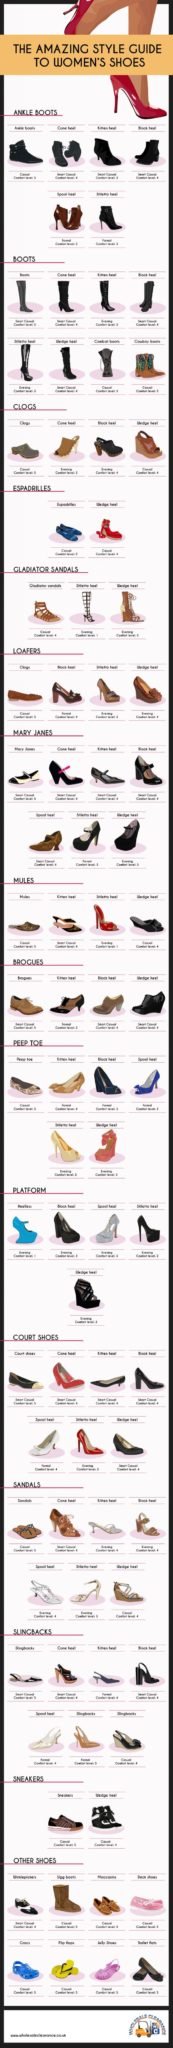 Shoes Every Woman Should Have